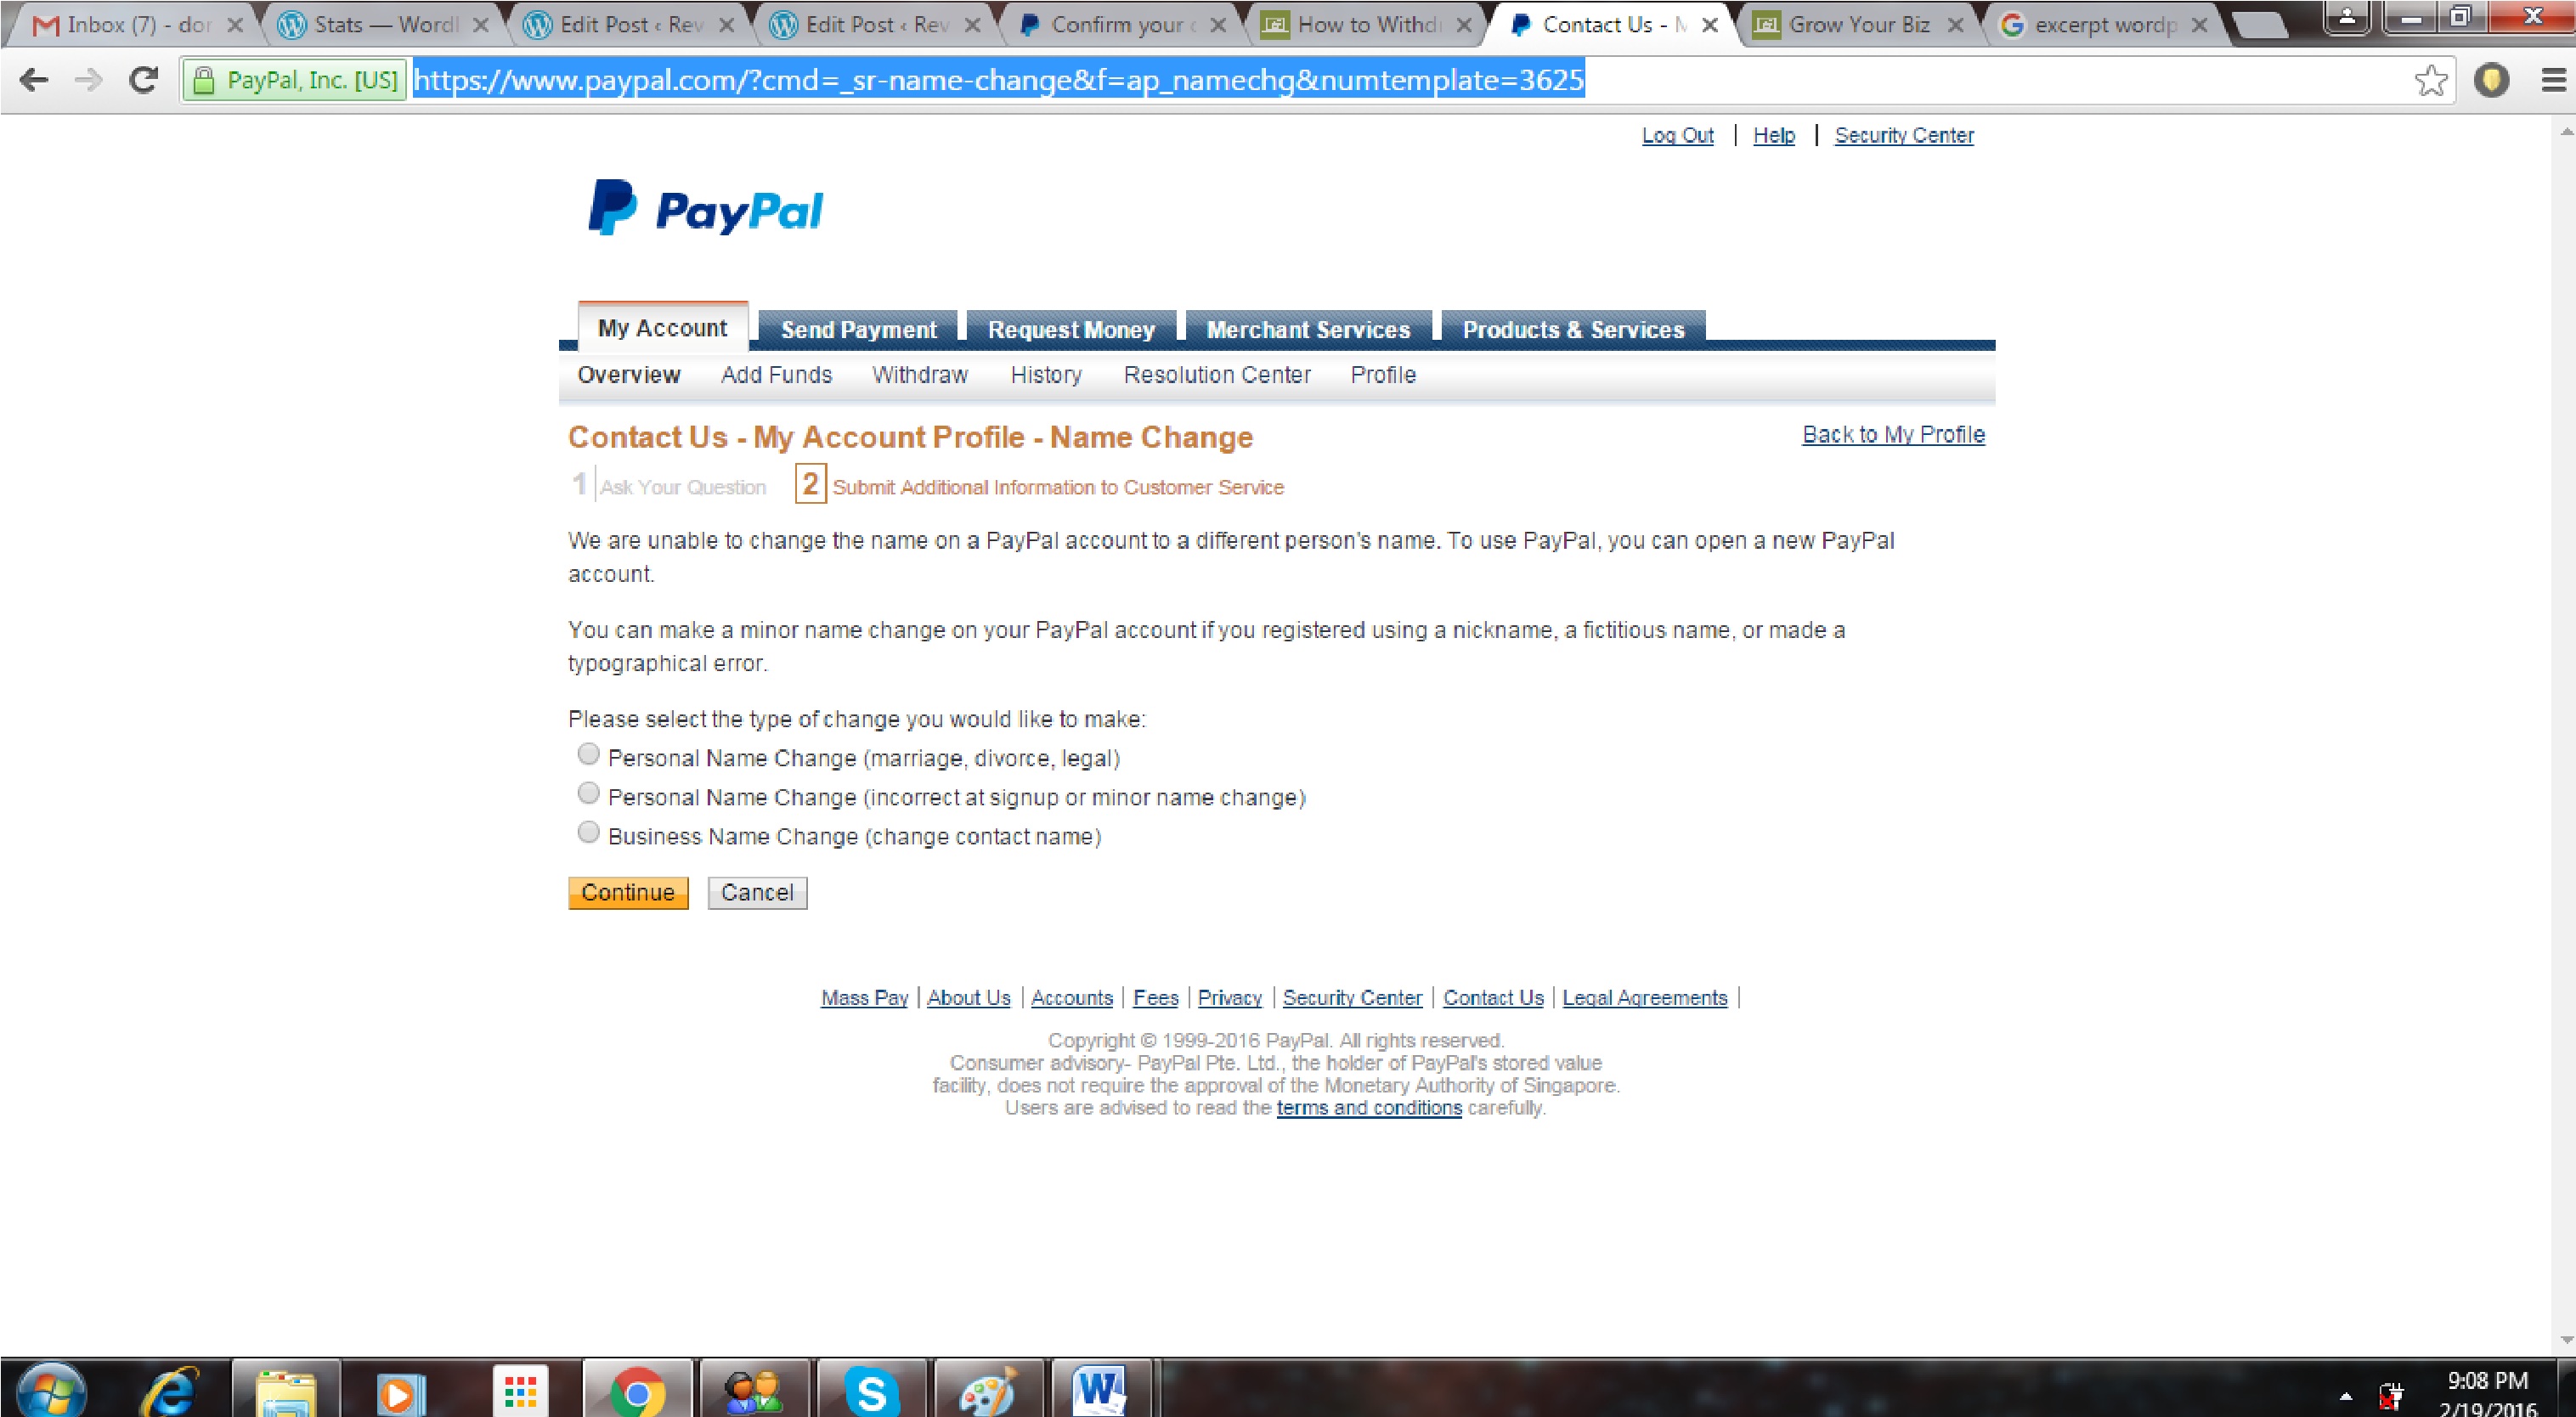 Change name page on Paypal